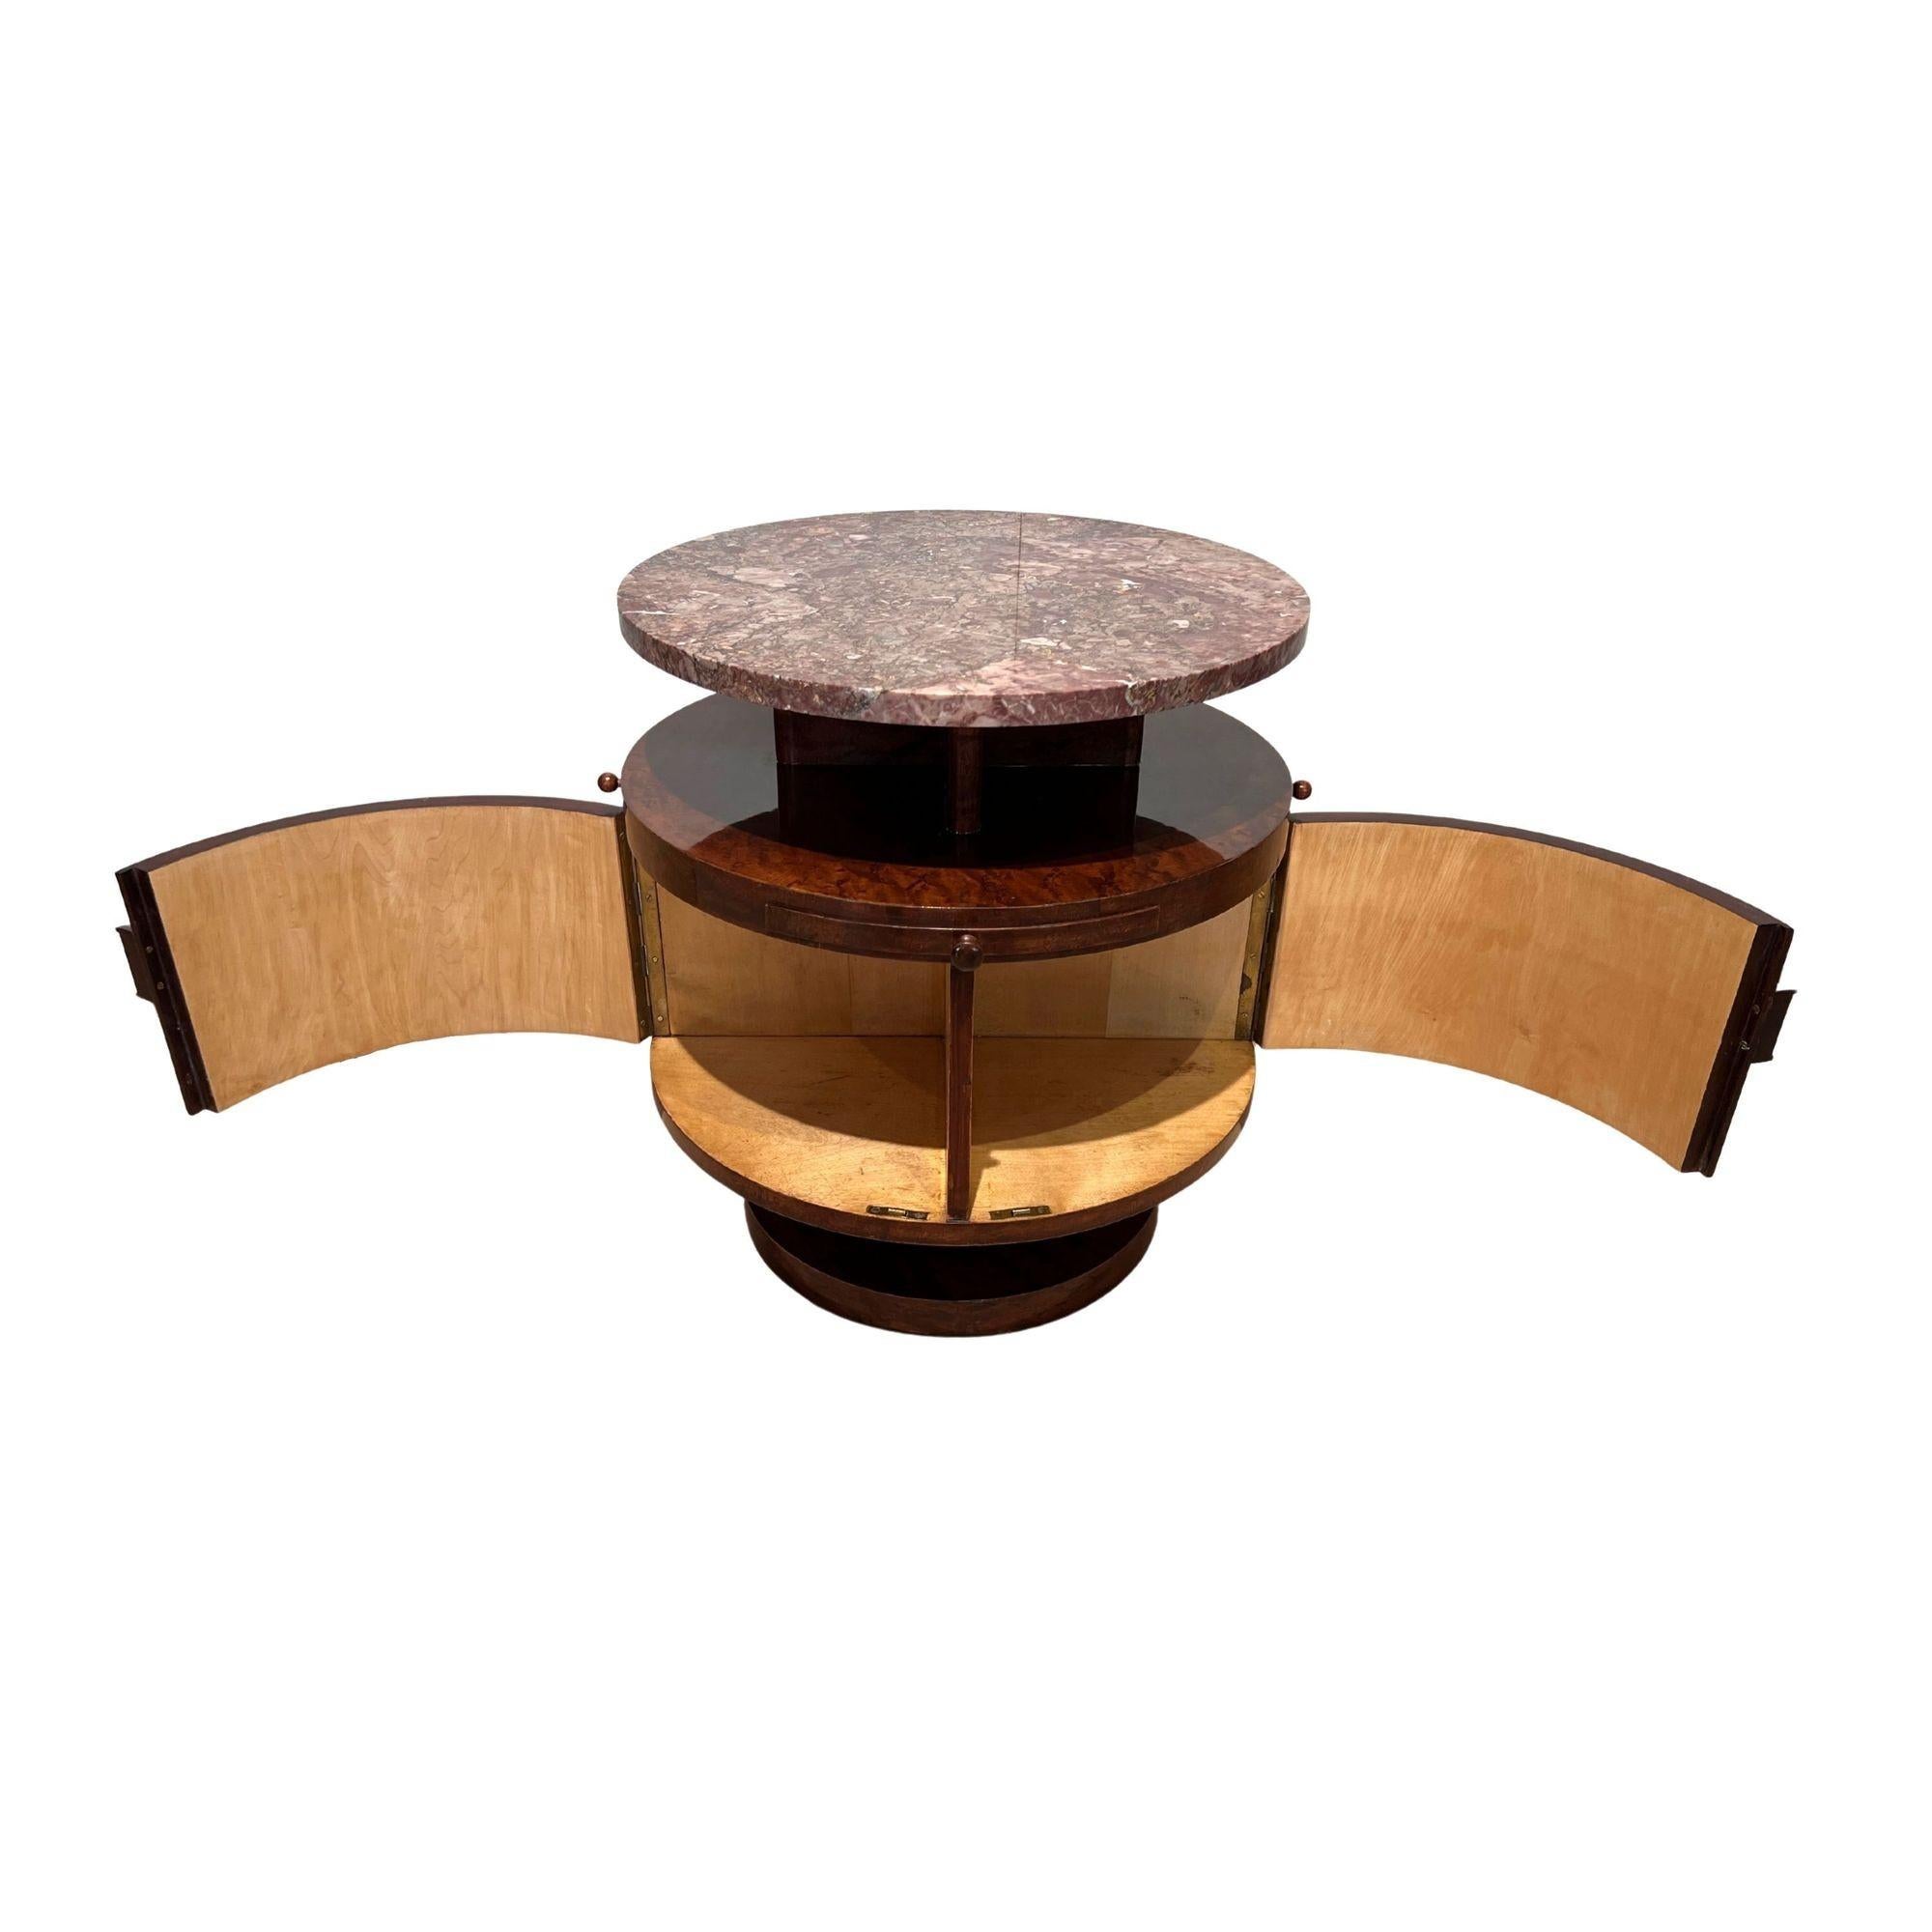 French Art Deco Revolving Drum Table, Birds Eye Maple, Marble, France, circa 1930 For Sale